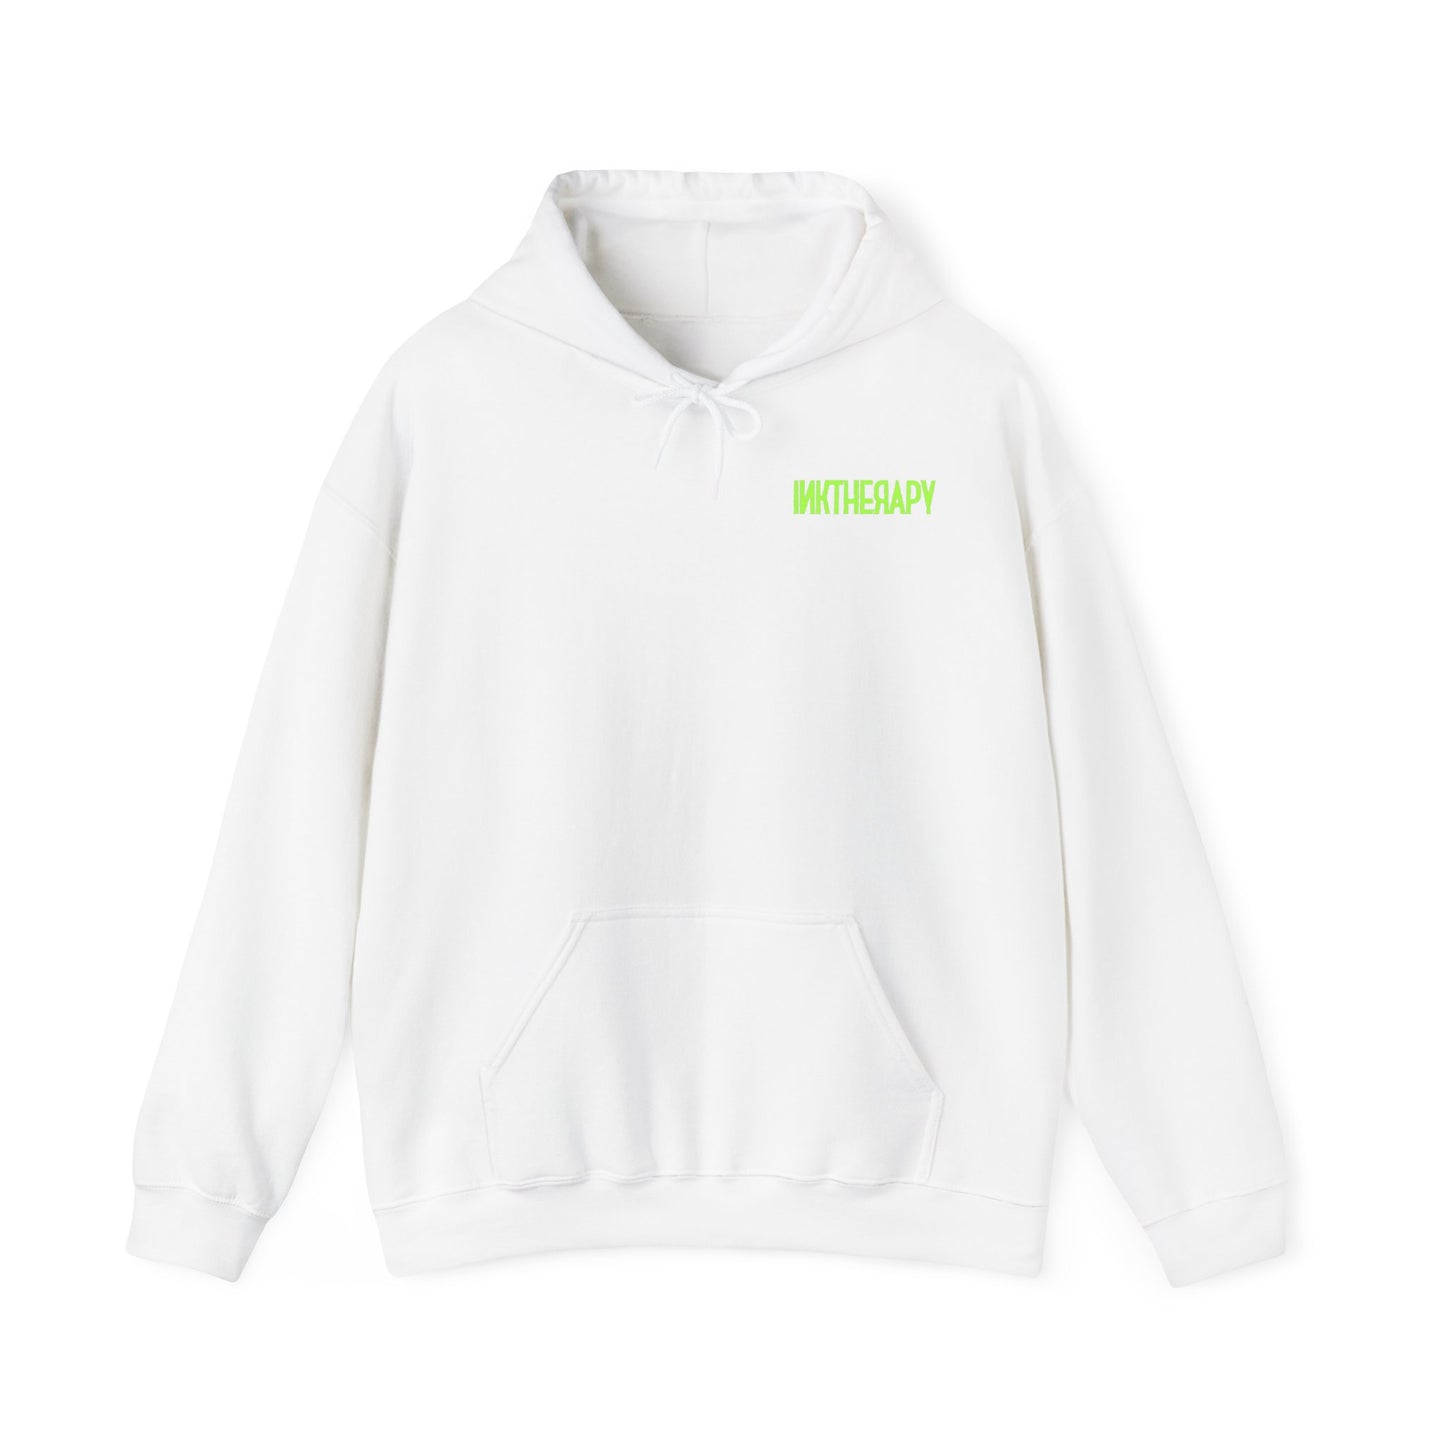 InkTherapy 'Lime Green' Unisex Heavy Blend Hoodie